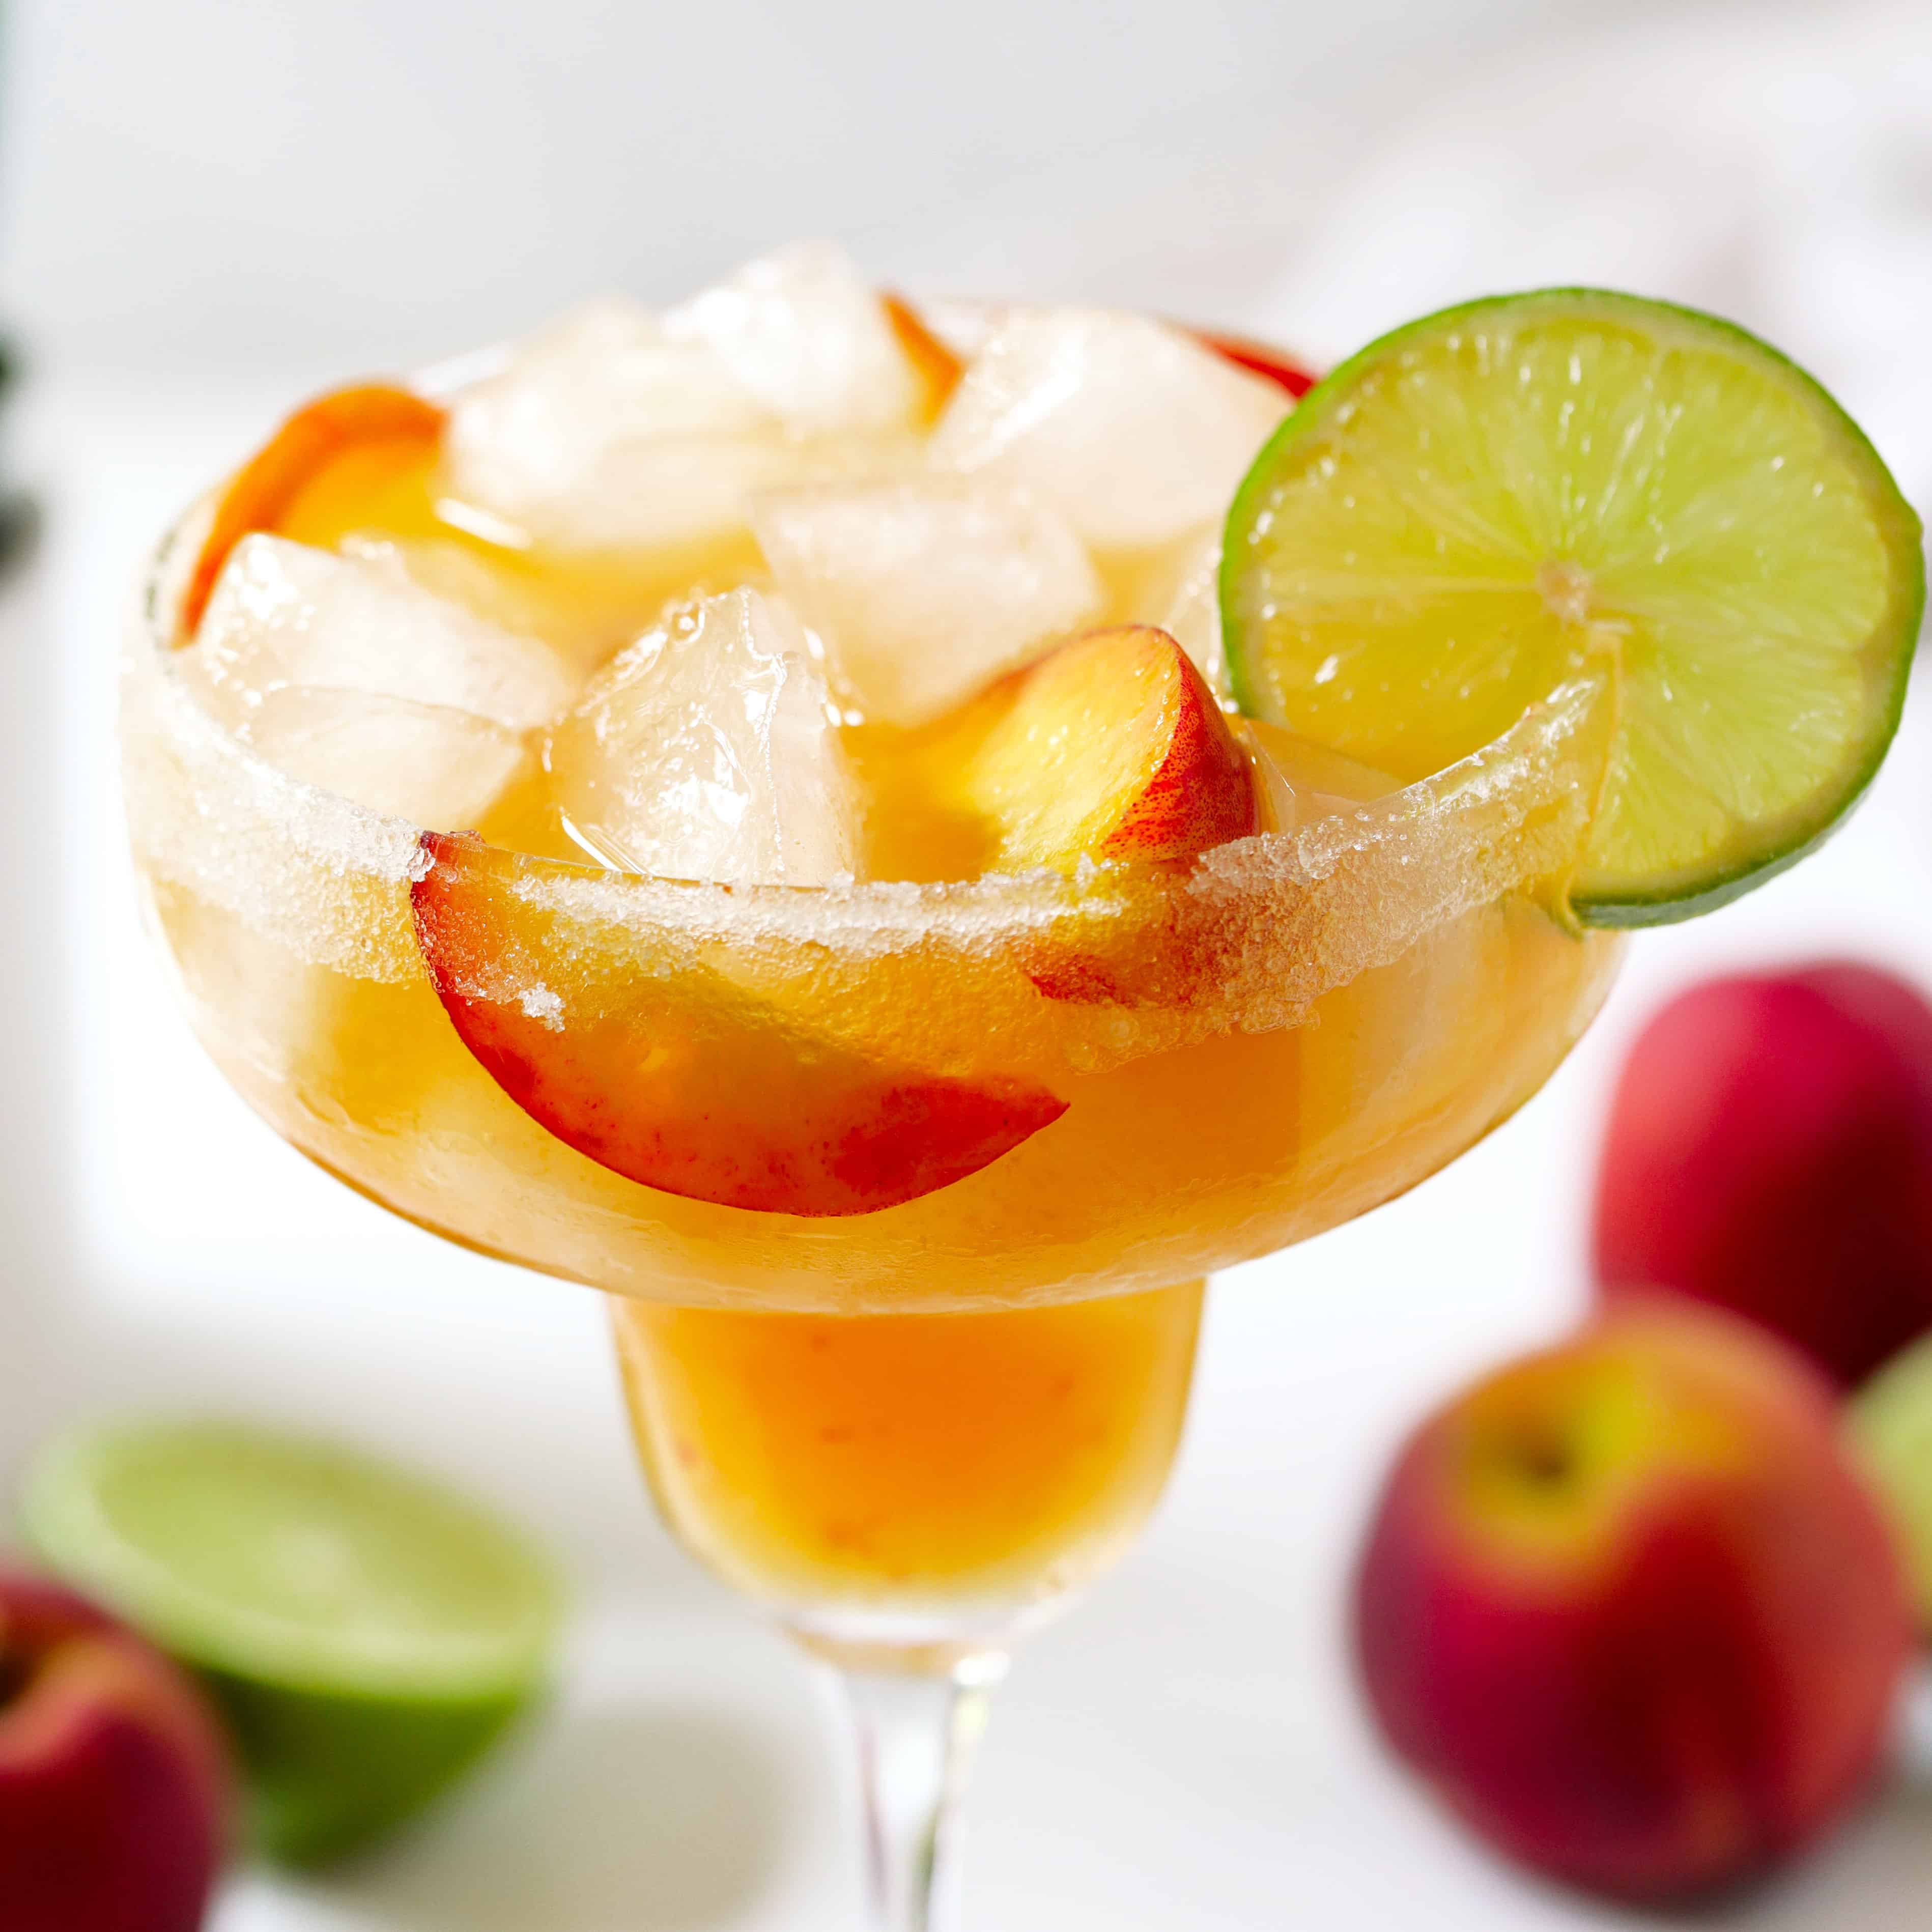 A peach margarita with the peach slices mixed in with the ice and a lime wheel around the edge of the glass. There are peaches and halved limes in the background.